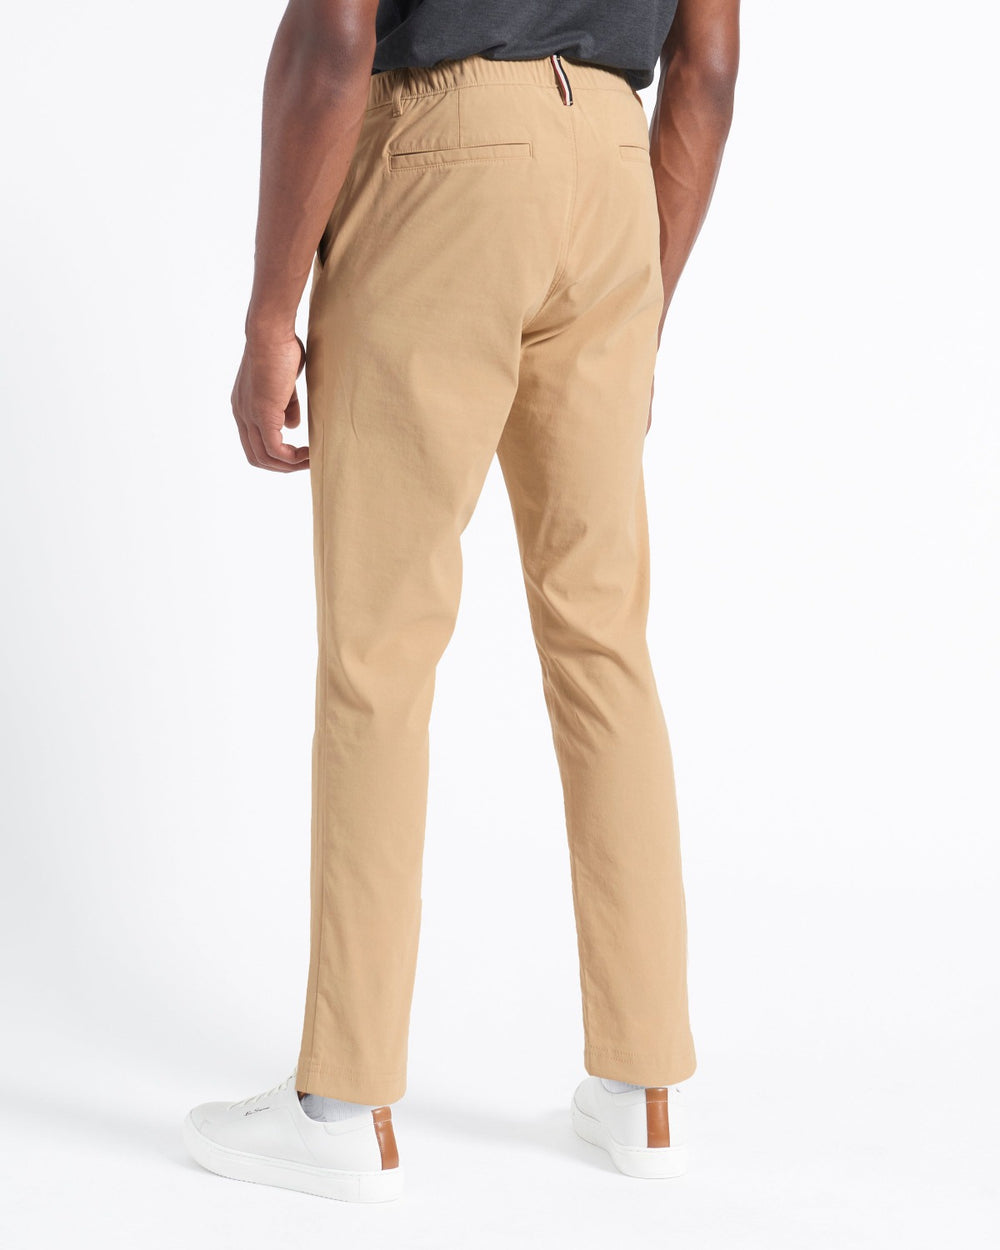 Bespoke Trousers  Trousers Meaning  A Trousers  Beige Trousers